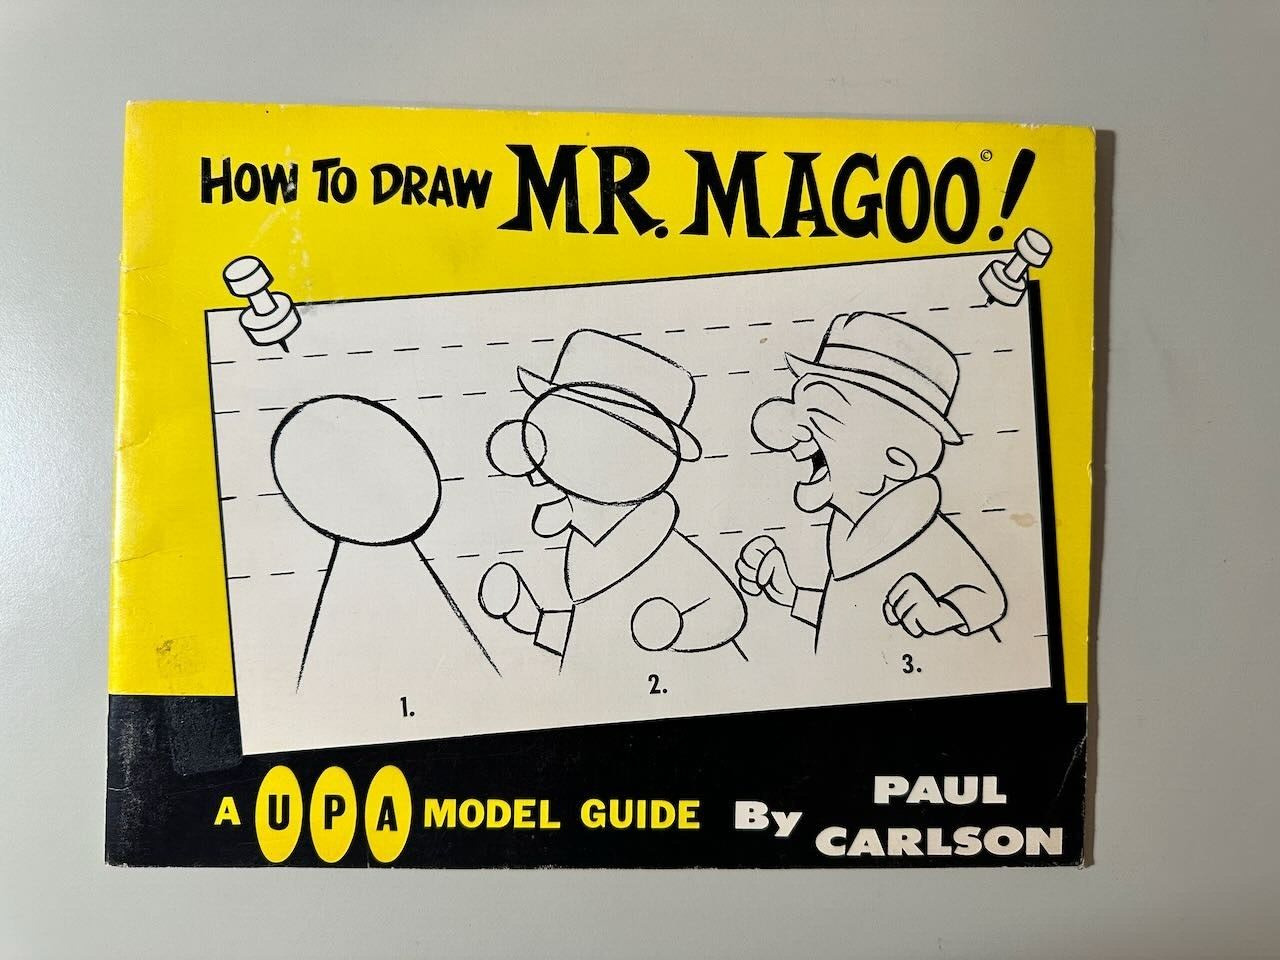 Vintage 1973 UPA Model Guide How to Draw Mr. Magoo by Paul Carlson VERY RARE